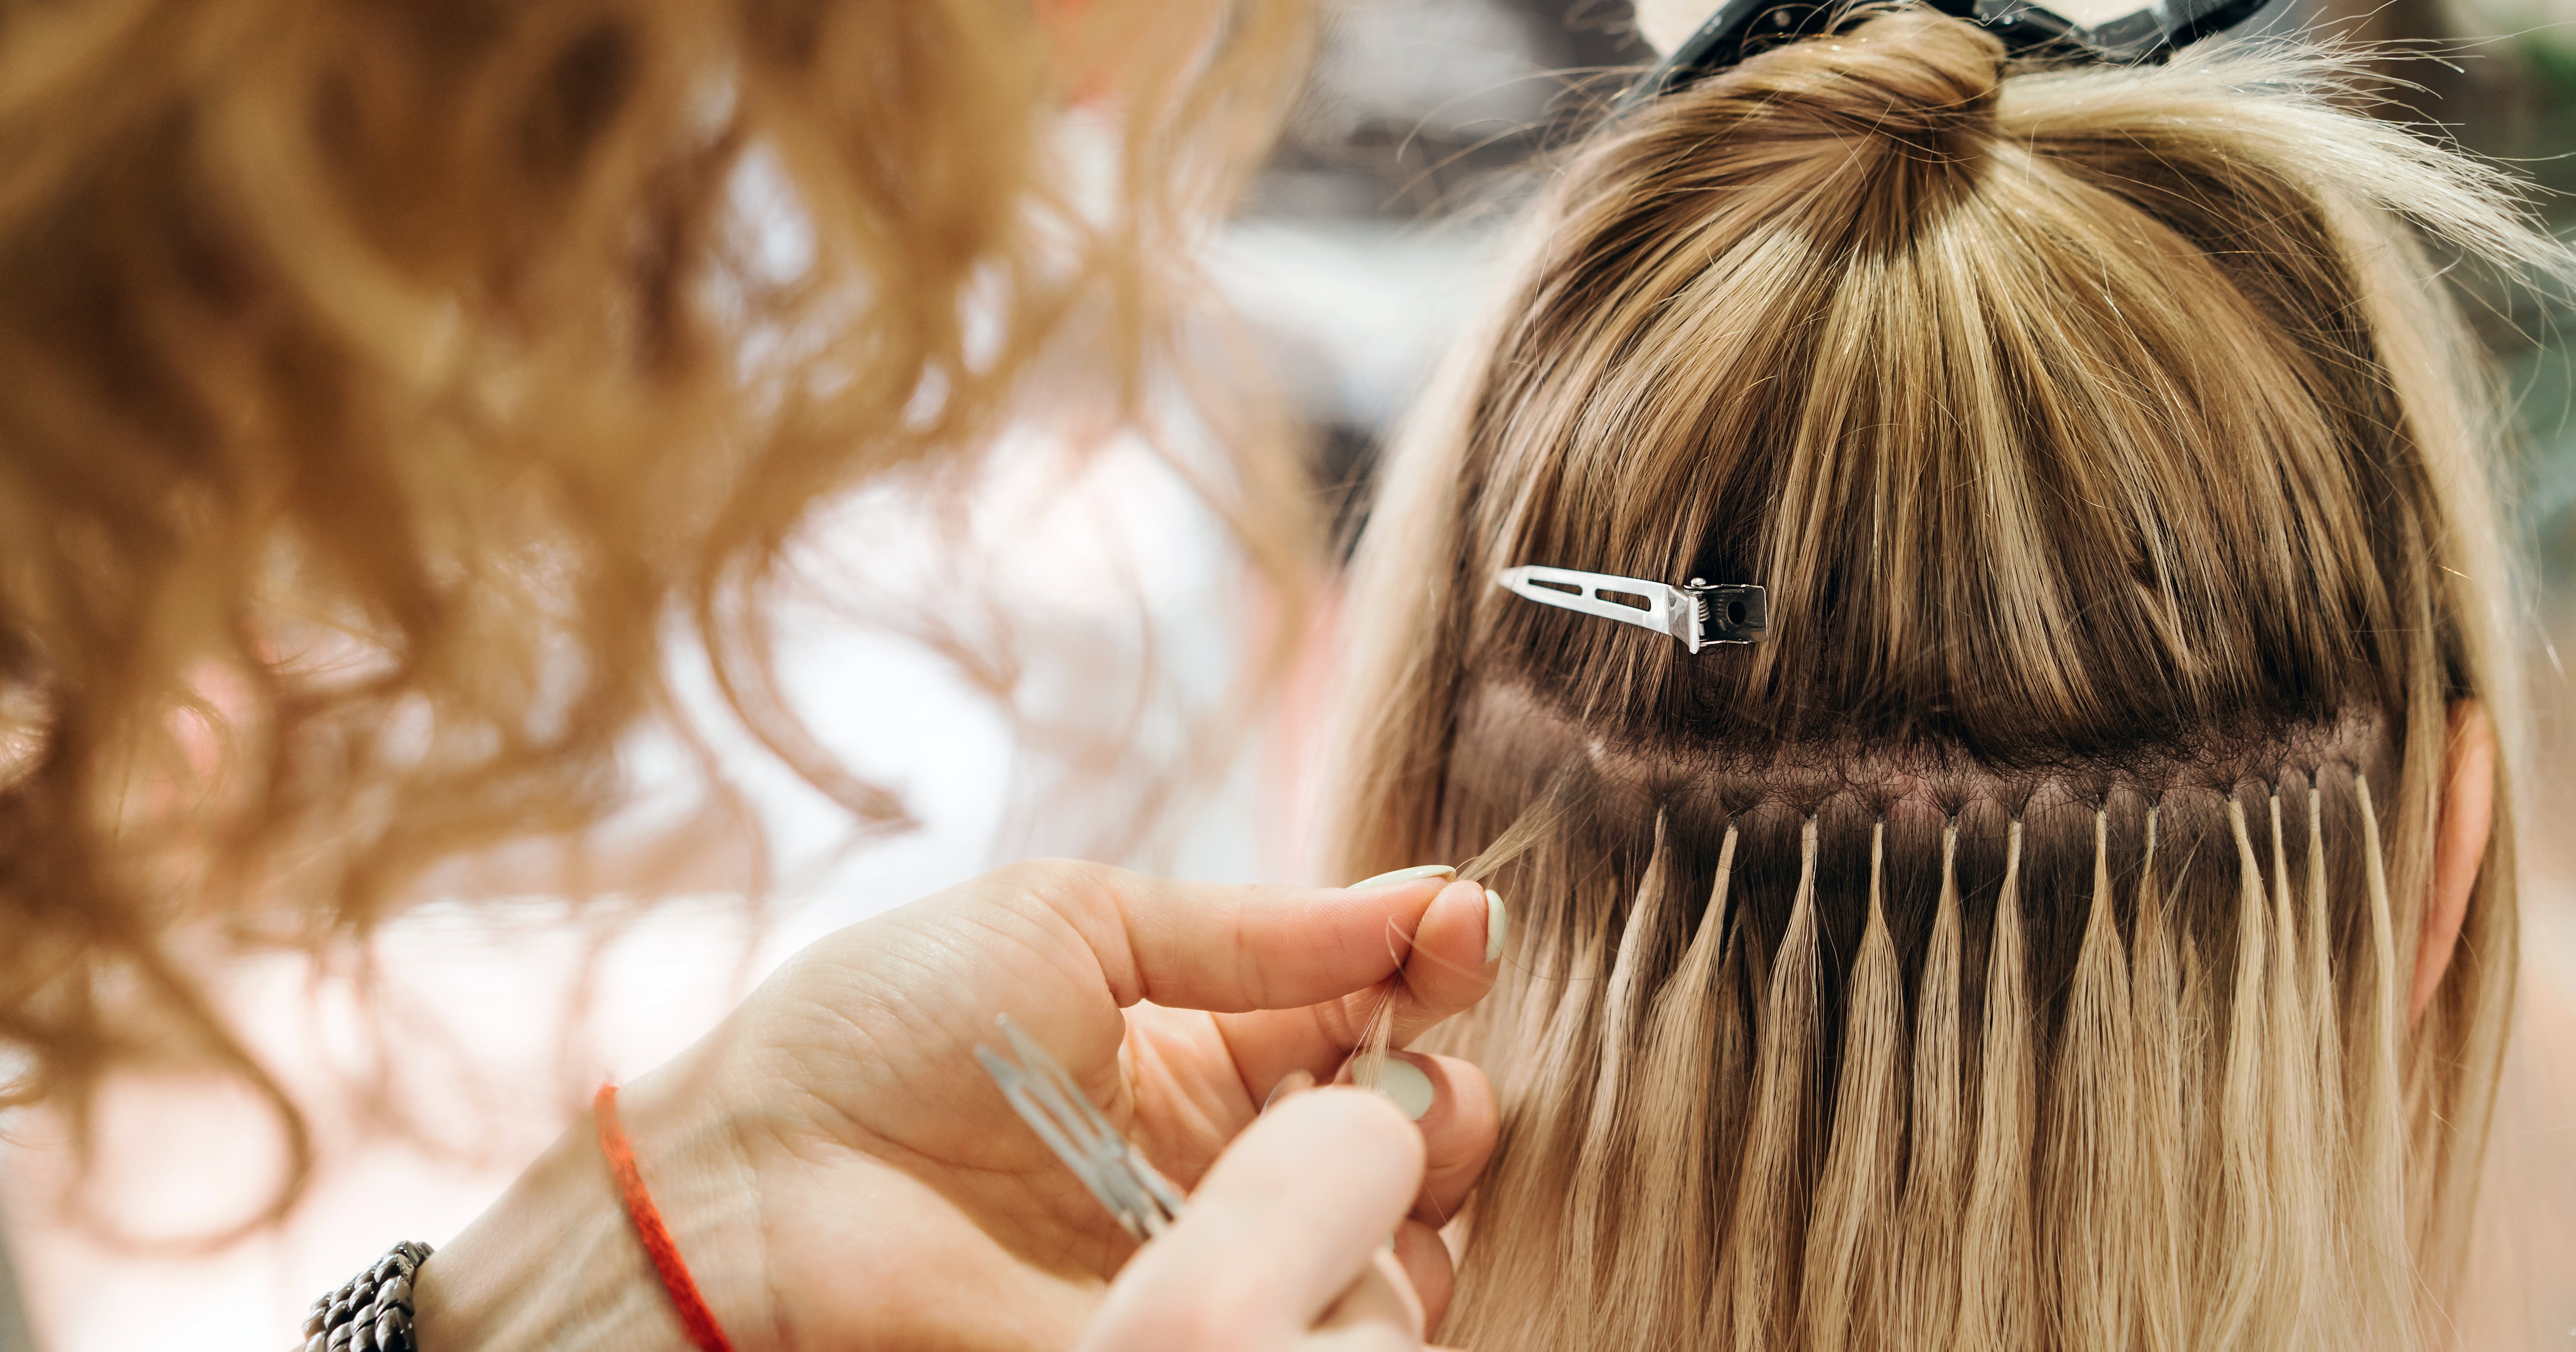 Hair Extensions 101: Everything You Should Know